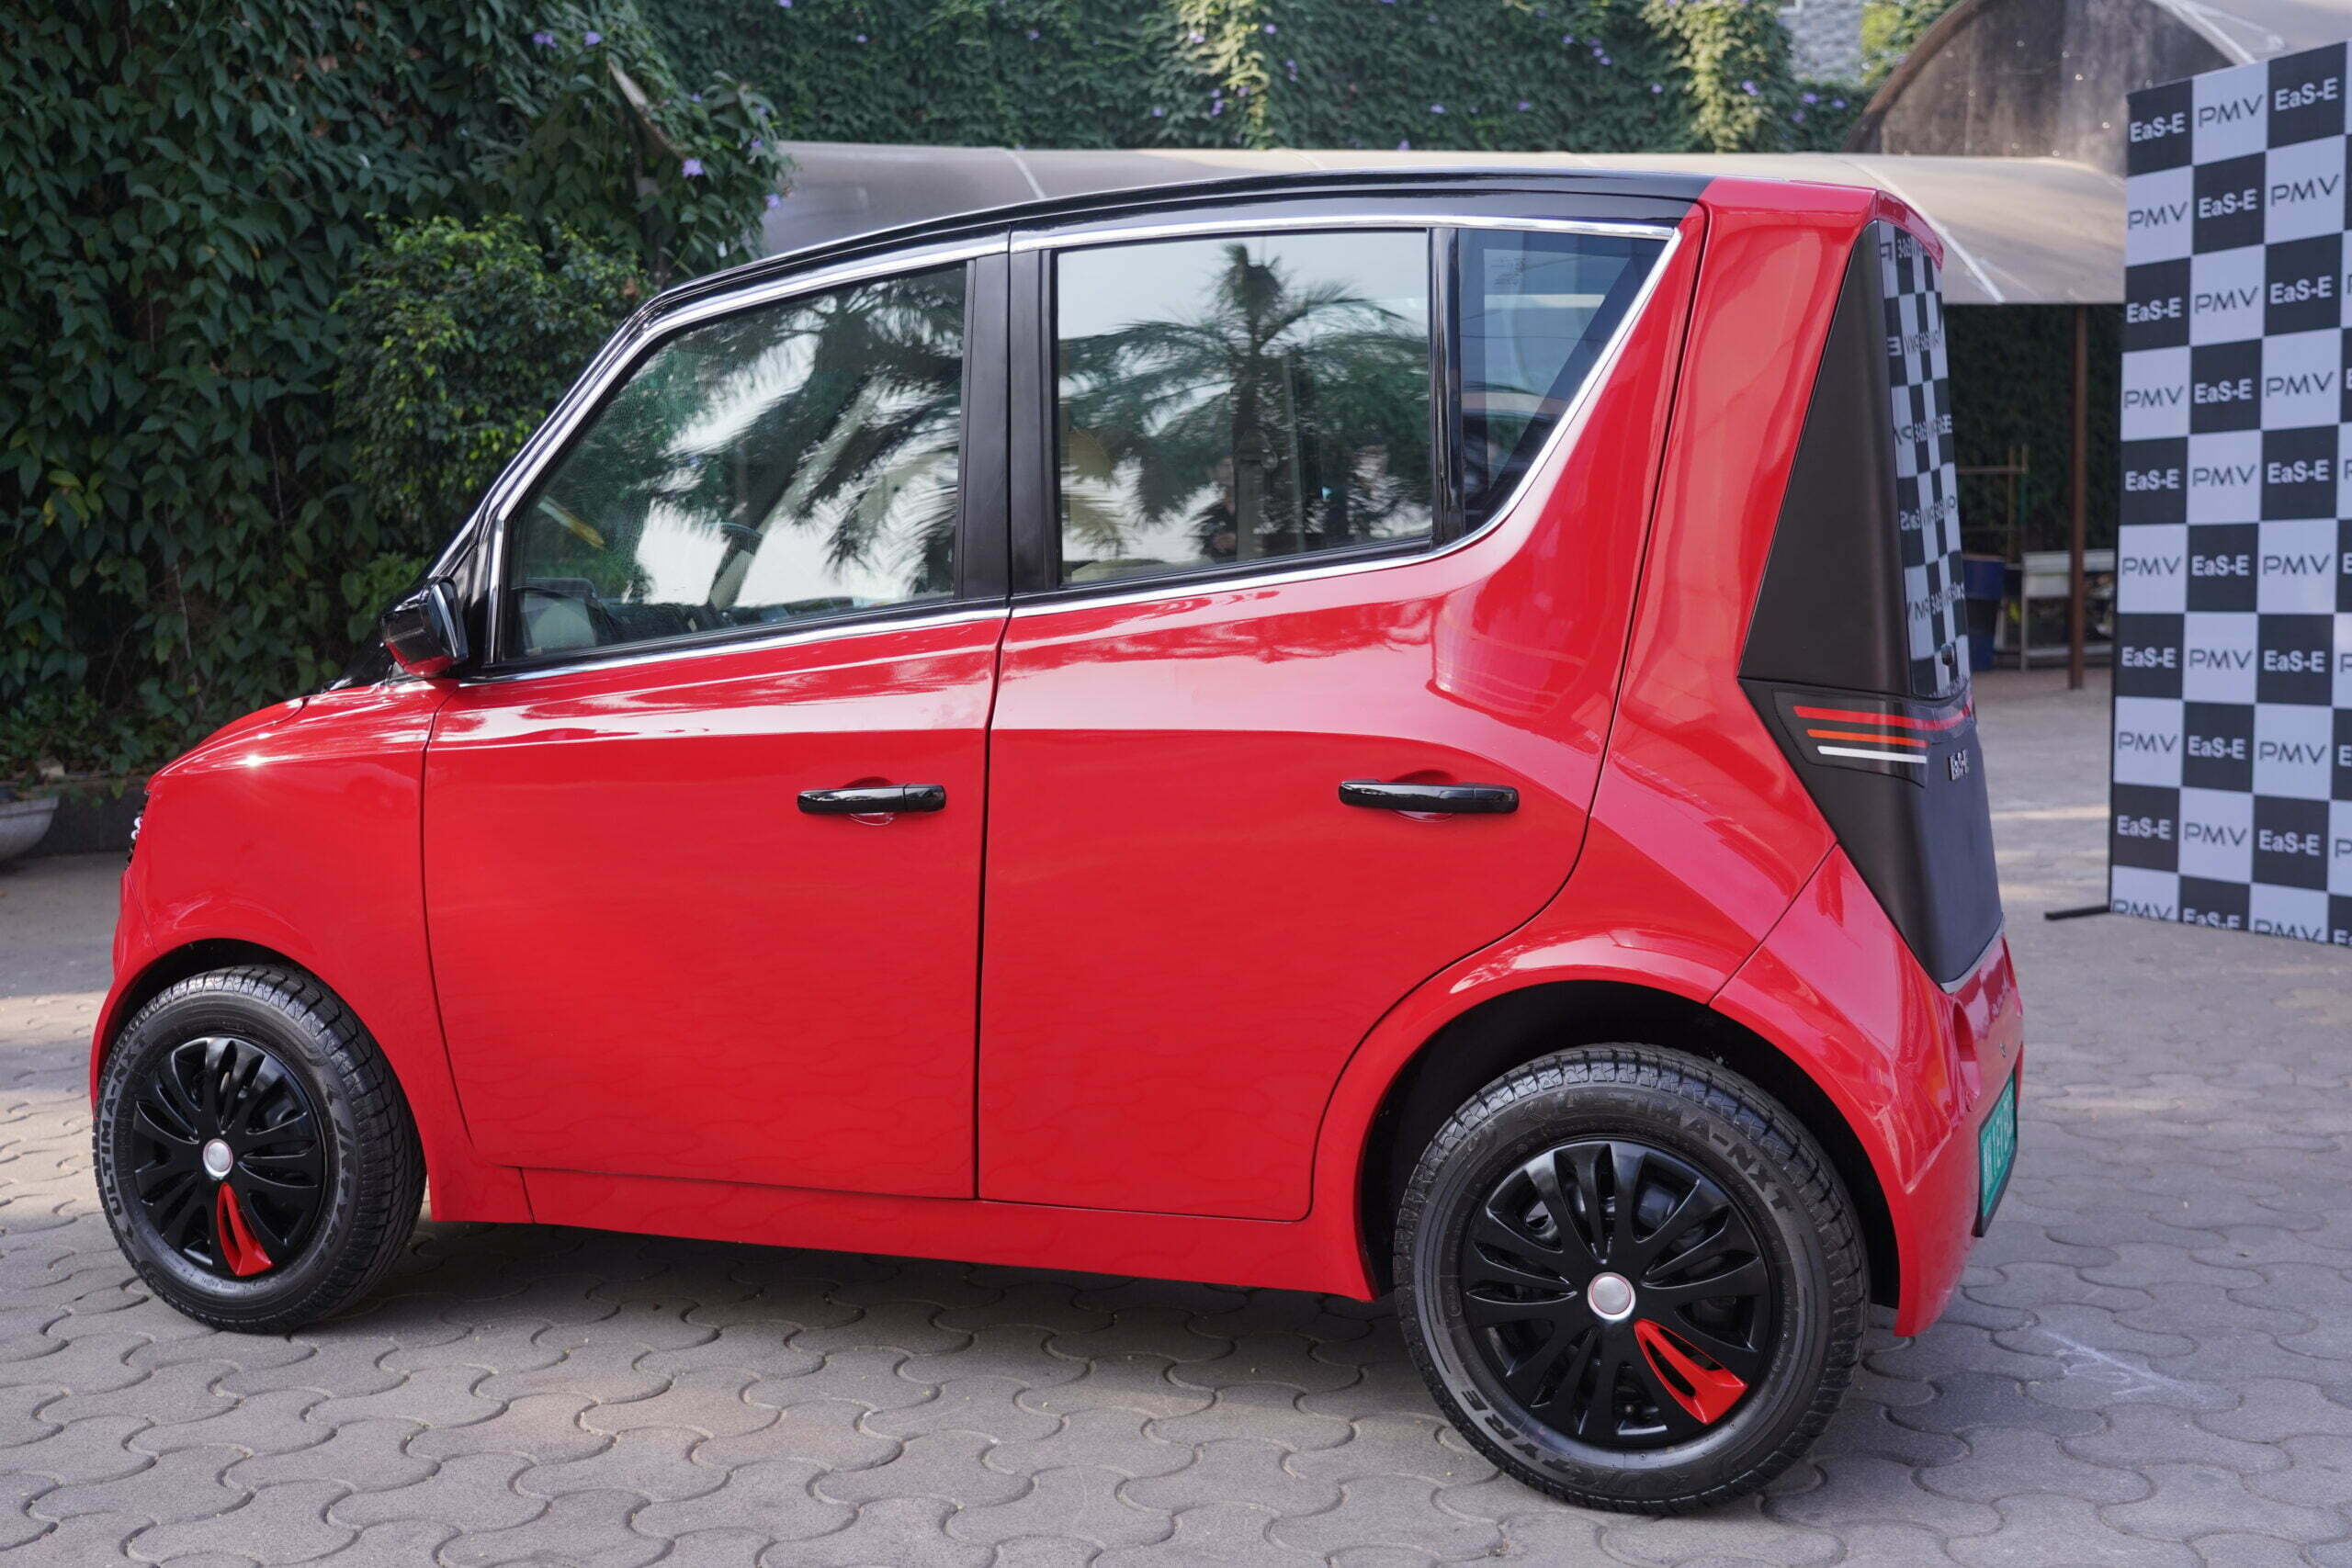 PMV Electric Car EASE - Could Be India's Smallest 4W EV (3)